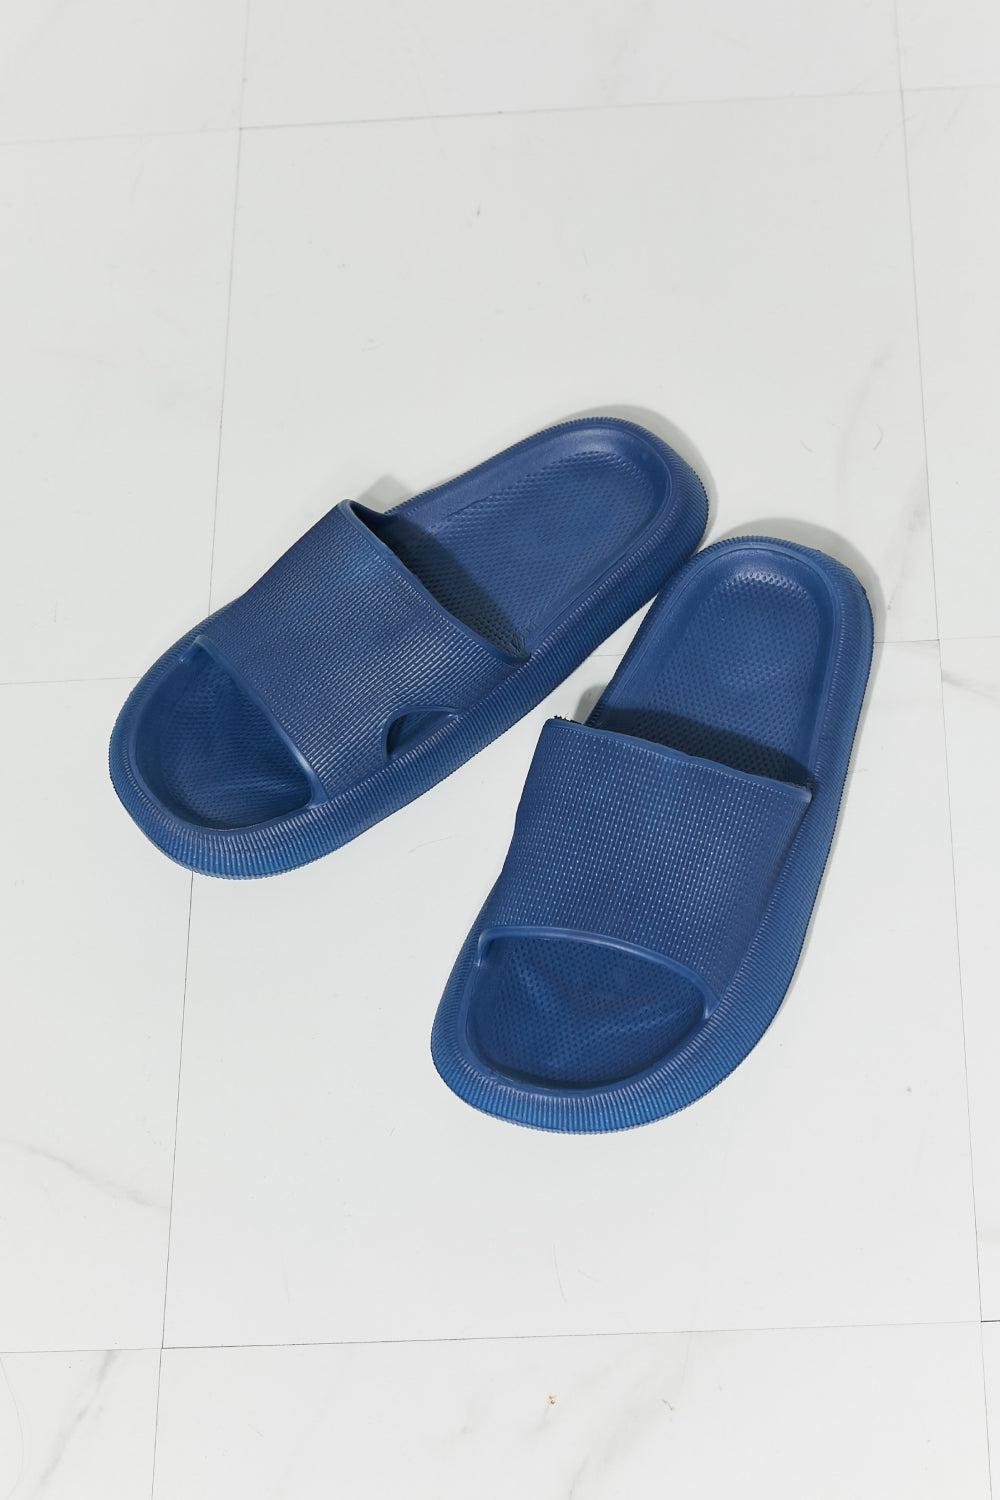 MMShoes Arms Around Me Open Toe Slide in Navy BLUE ZONE PLANET